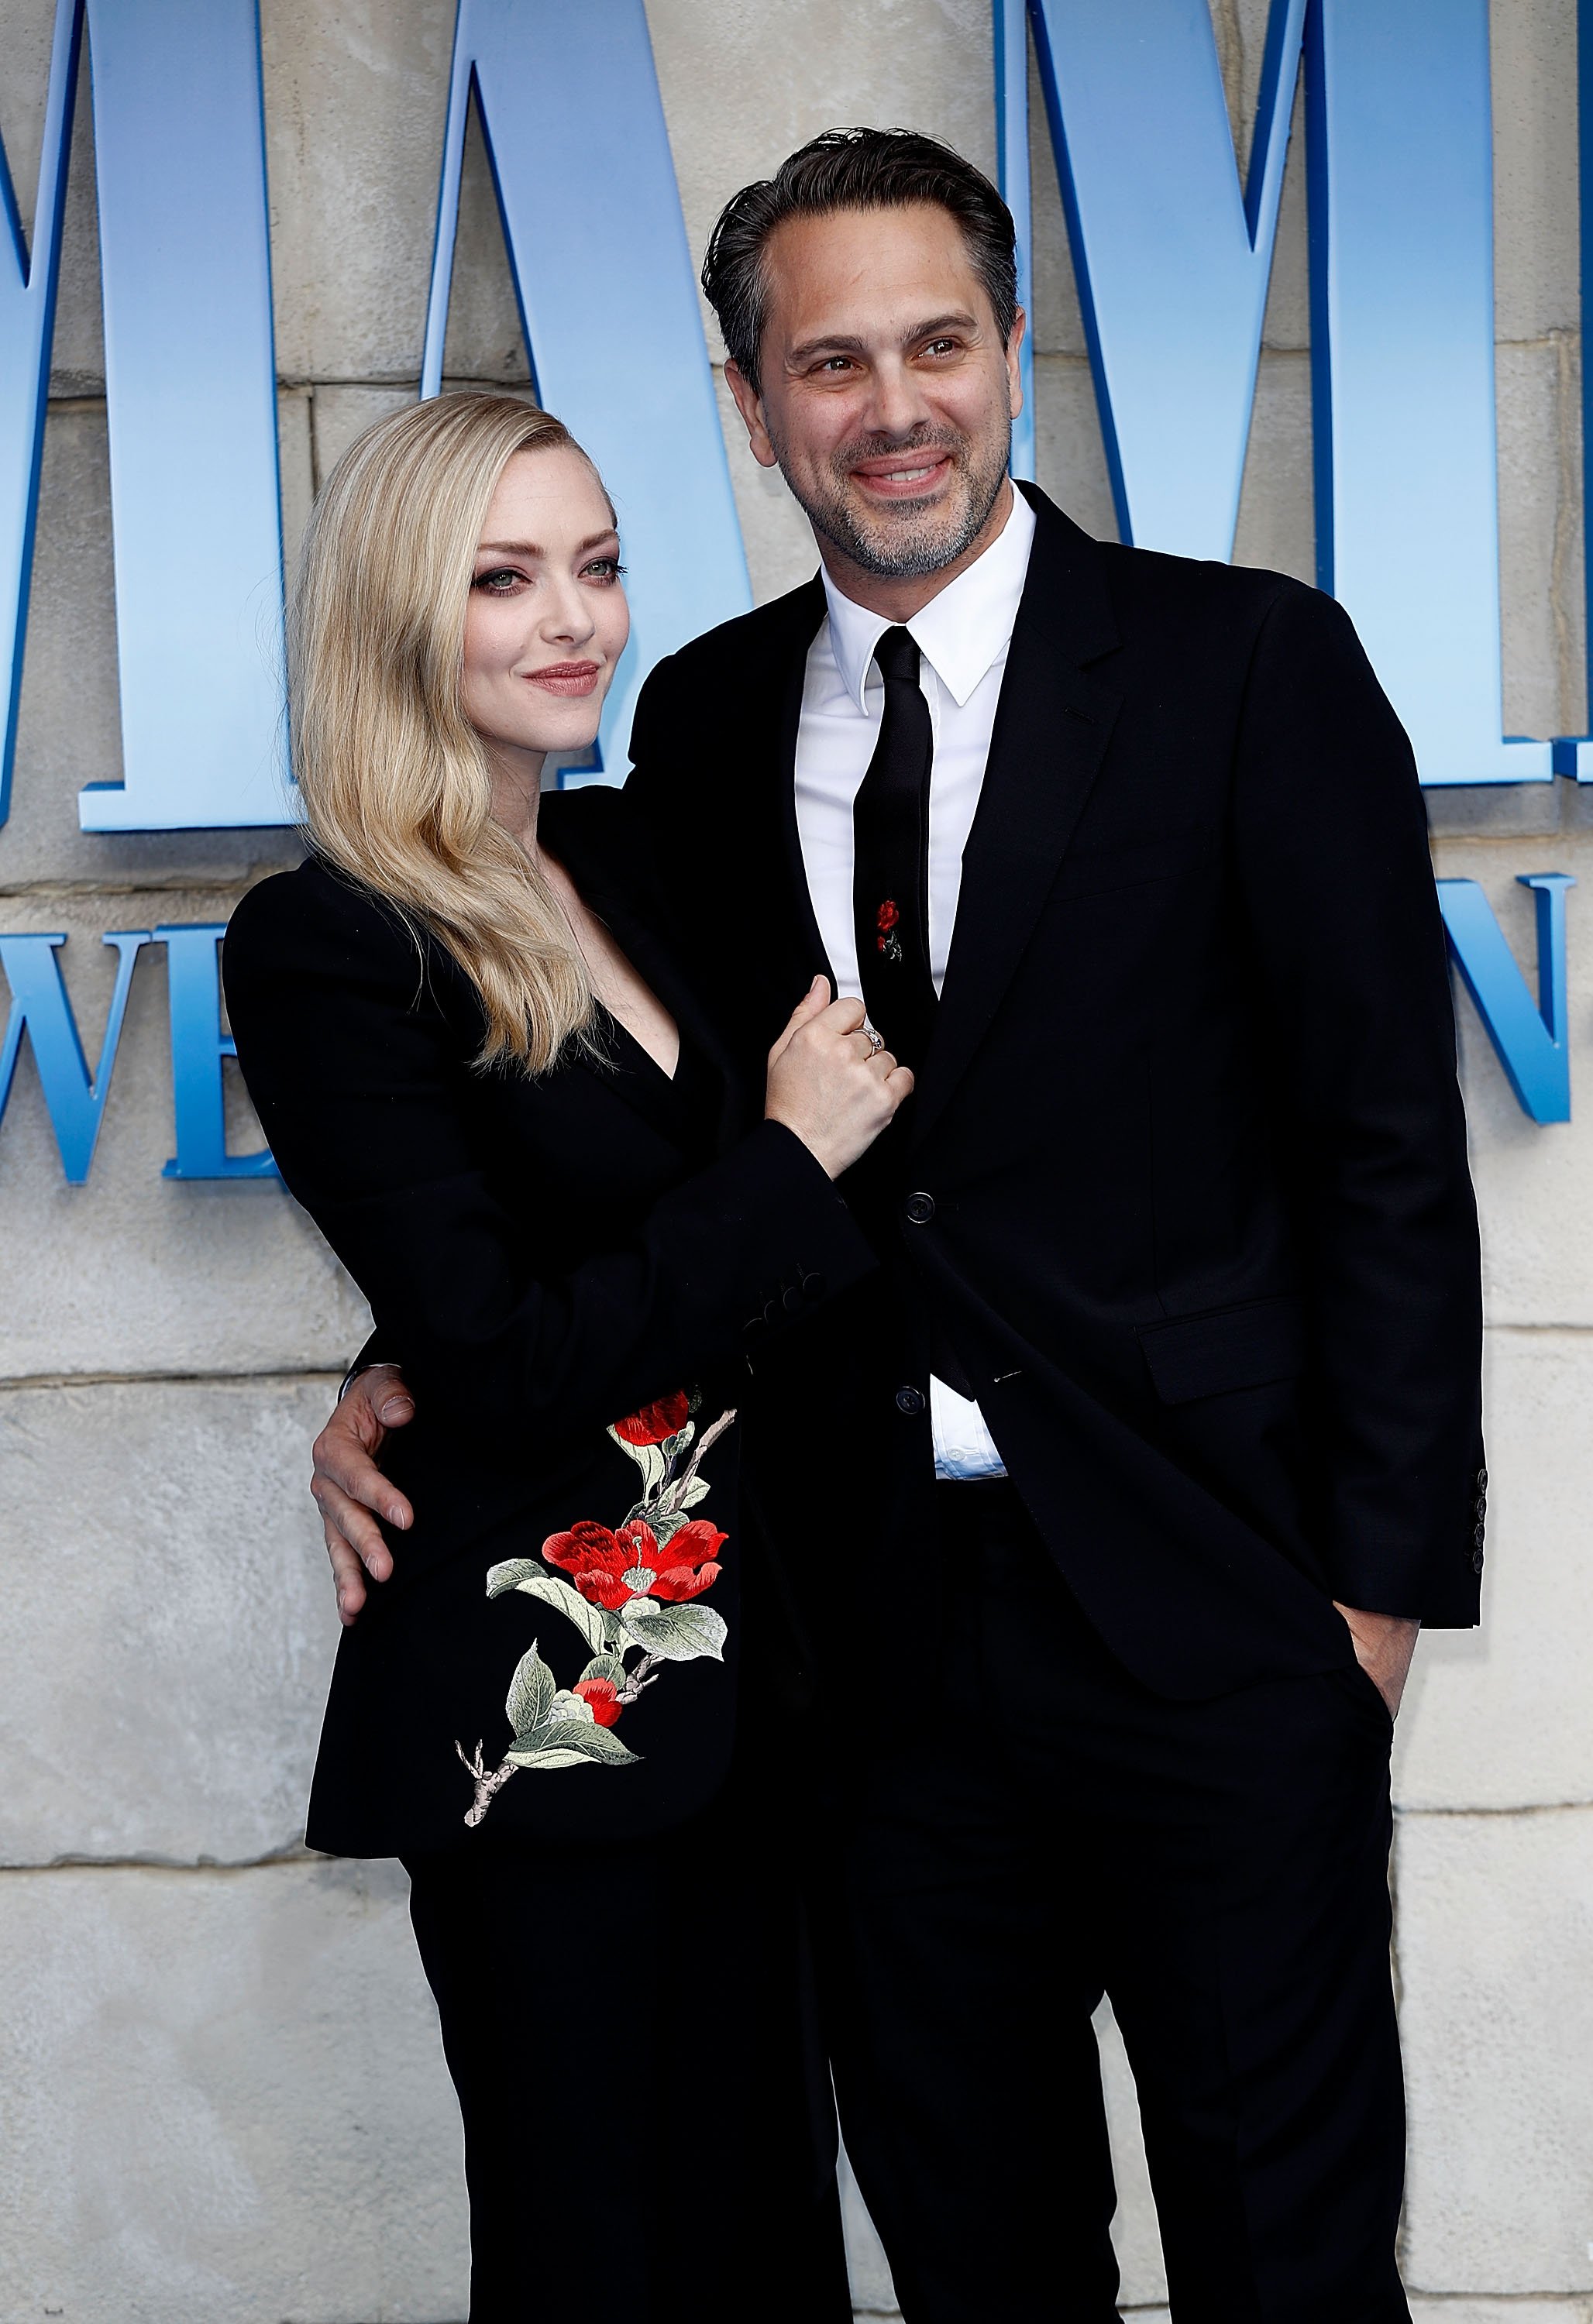 Amanda Seyfried and Thomas Sadoski attend the UK Premiere of "Mamma Mia! Here We Go Again" at Eventim Apollo on July 16, 2018, in London, England. | Source: Getty Images.